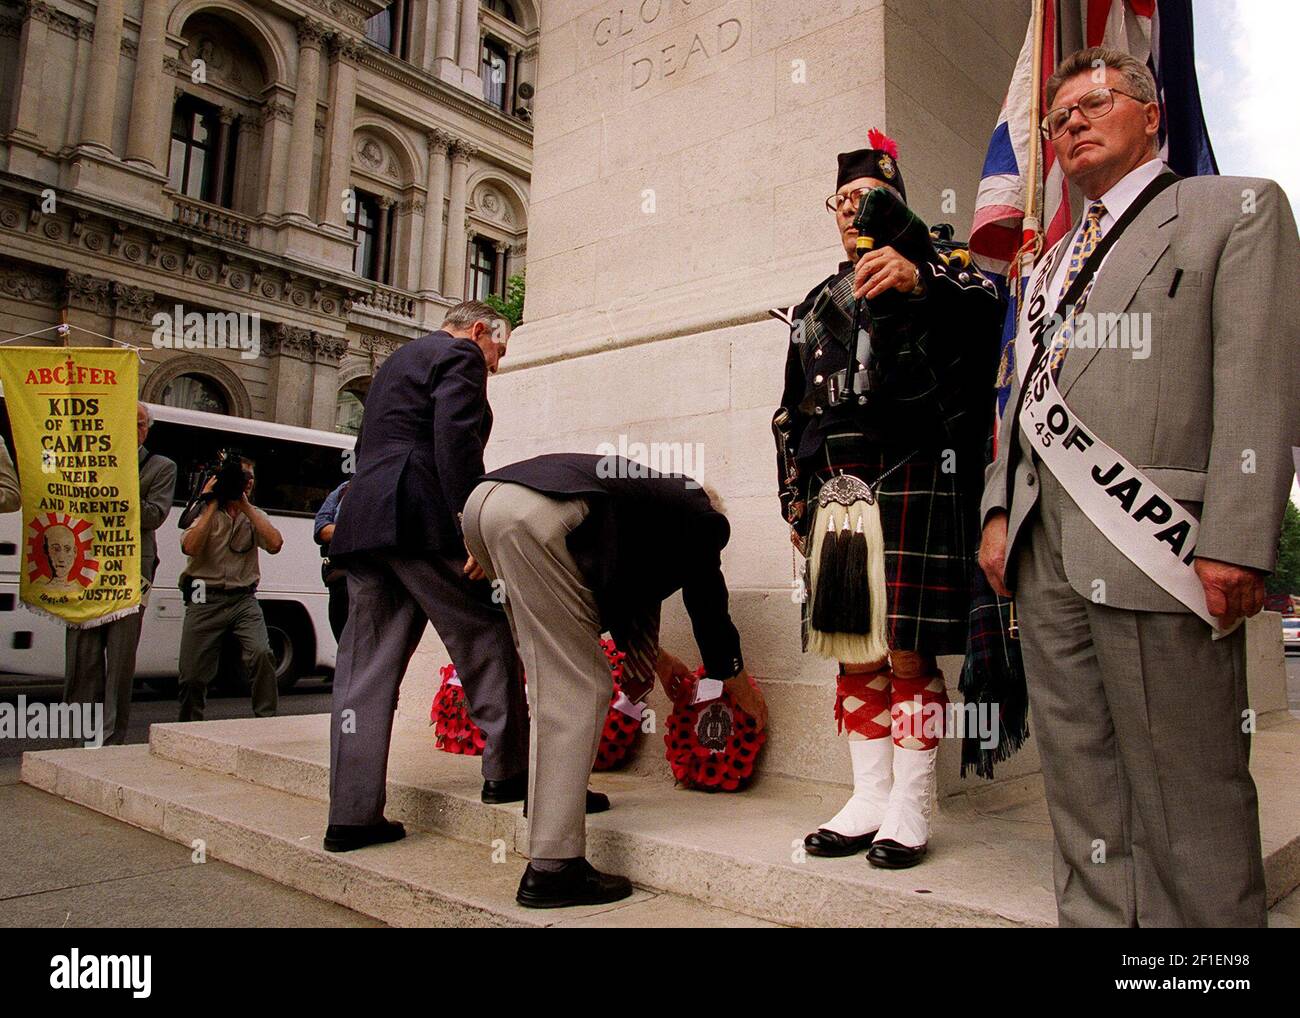 ON THE 55 ANNIVERSARY OF V.J. DAY W.W.2 JAPANESE P.O.W'S HELD A MEMORIAL AT THE CENITAPH WHERE REATHS WERE LAID , BILL PLENTY WAS THE LONE PIPER. PHOTOGRAPH BY MARK CHILVERS. 15/8/00 Stock Photo